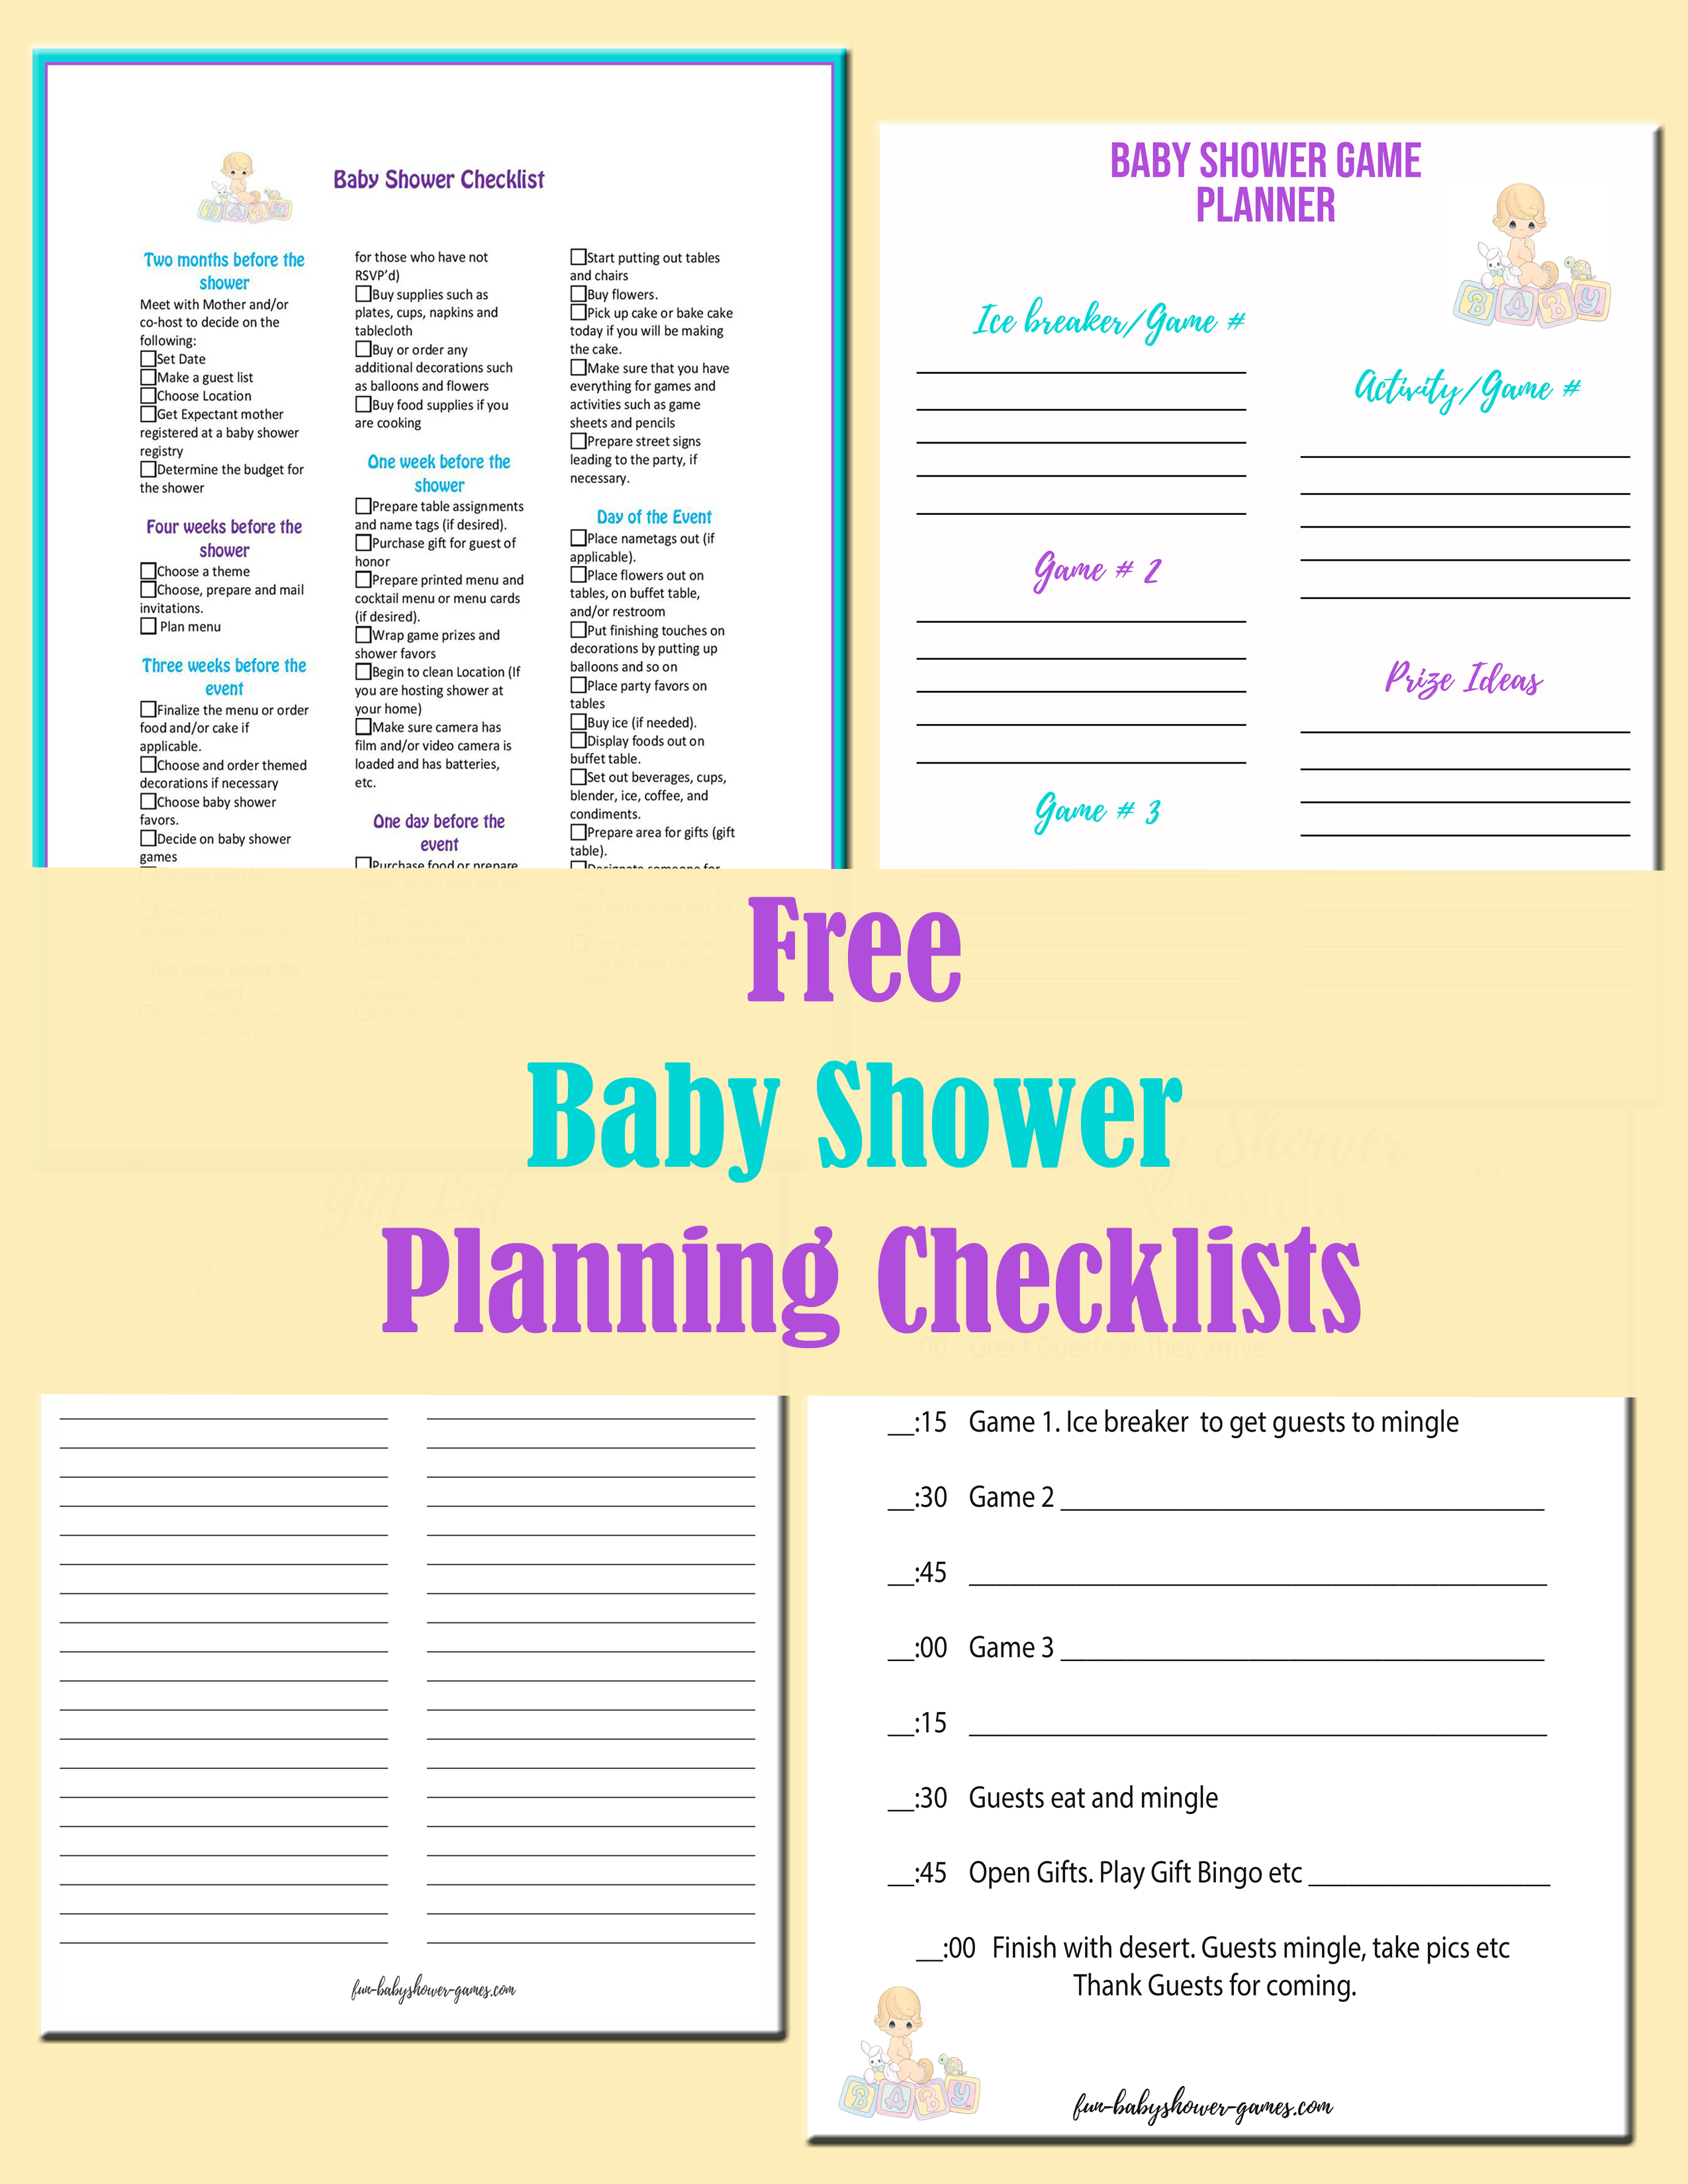 planning a baby shower